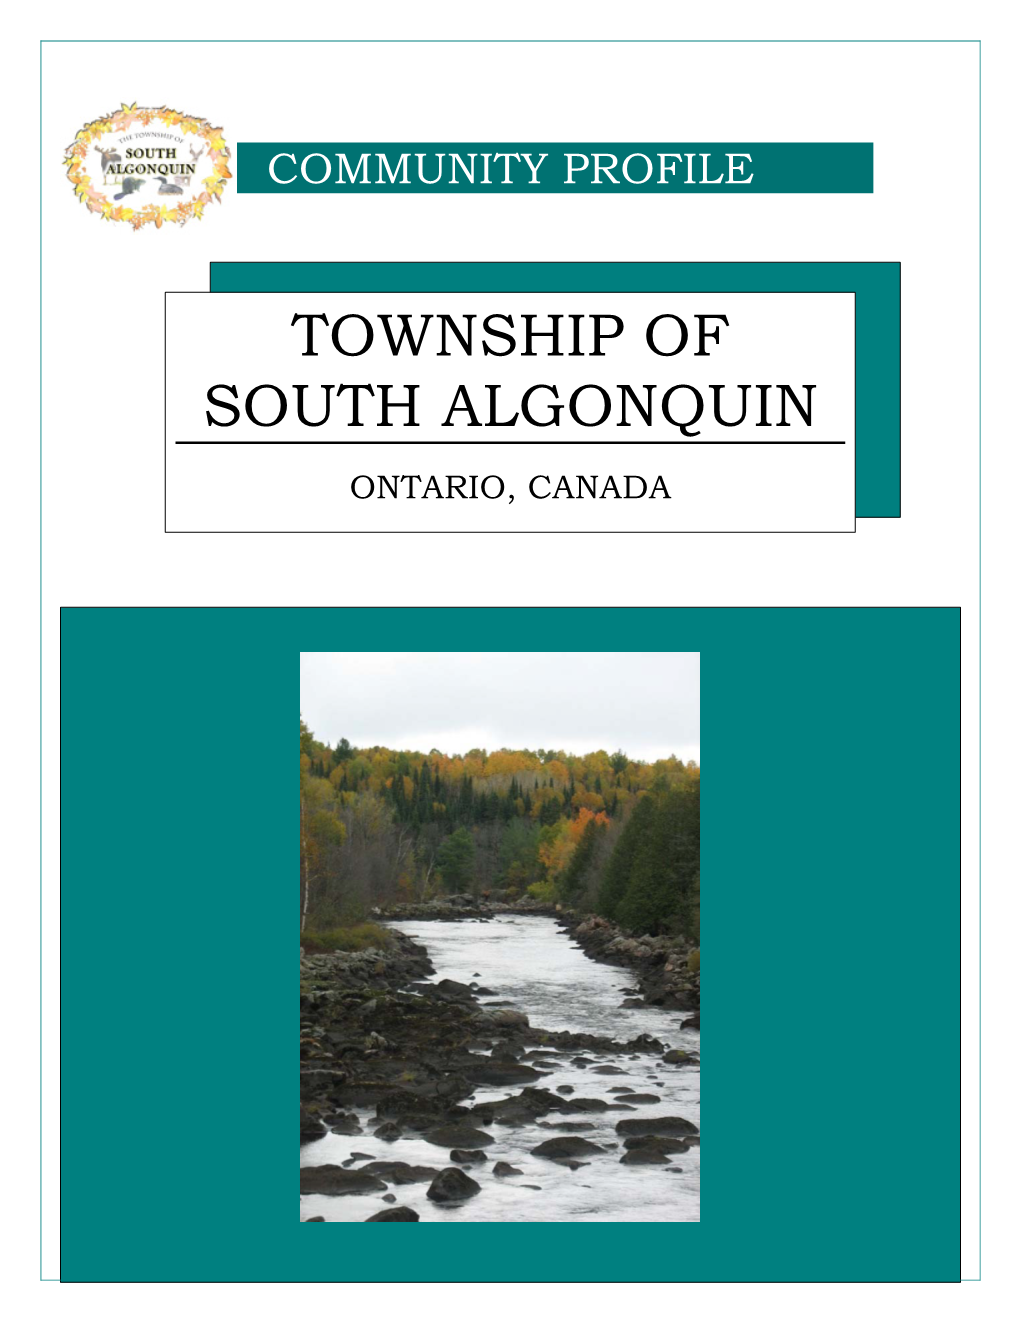 Township of South Algonquin Is Located in North-Eastern Ontario, Directly Adjacent to the World Famous Algonquin Provincial Park